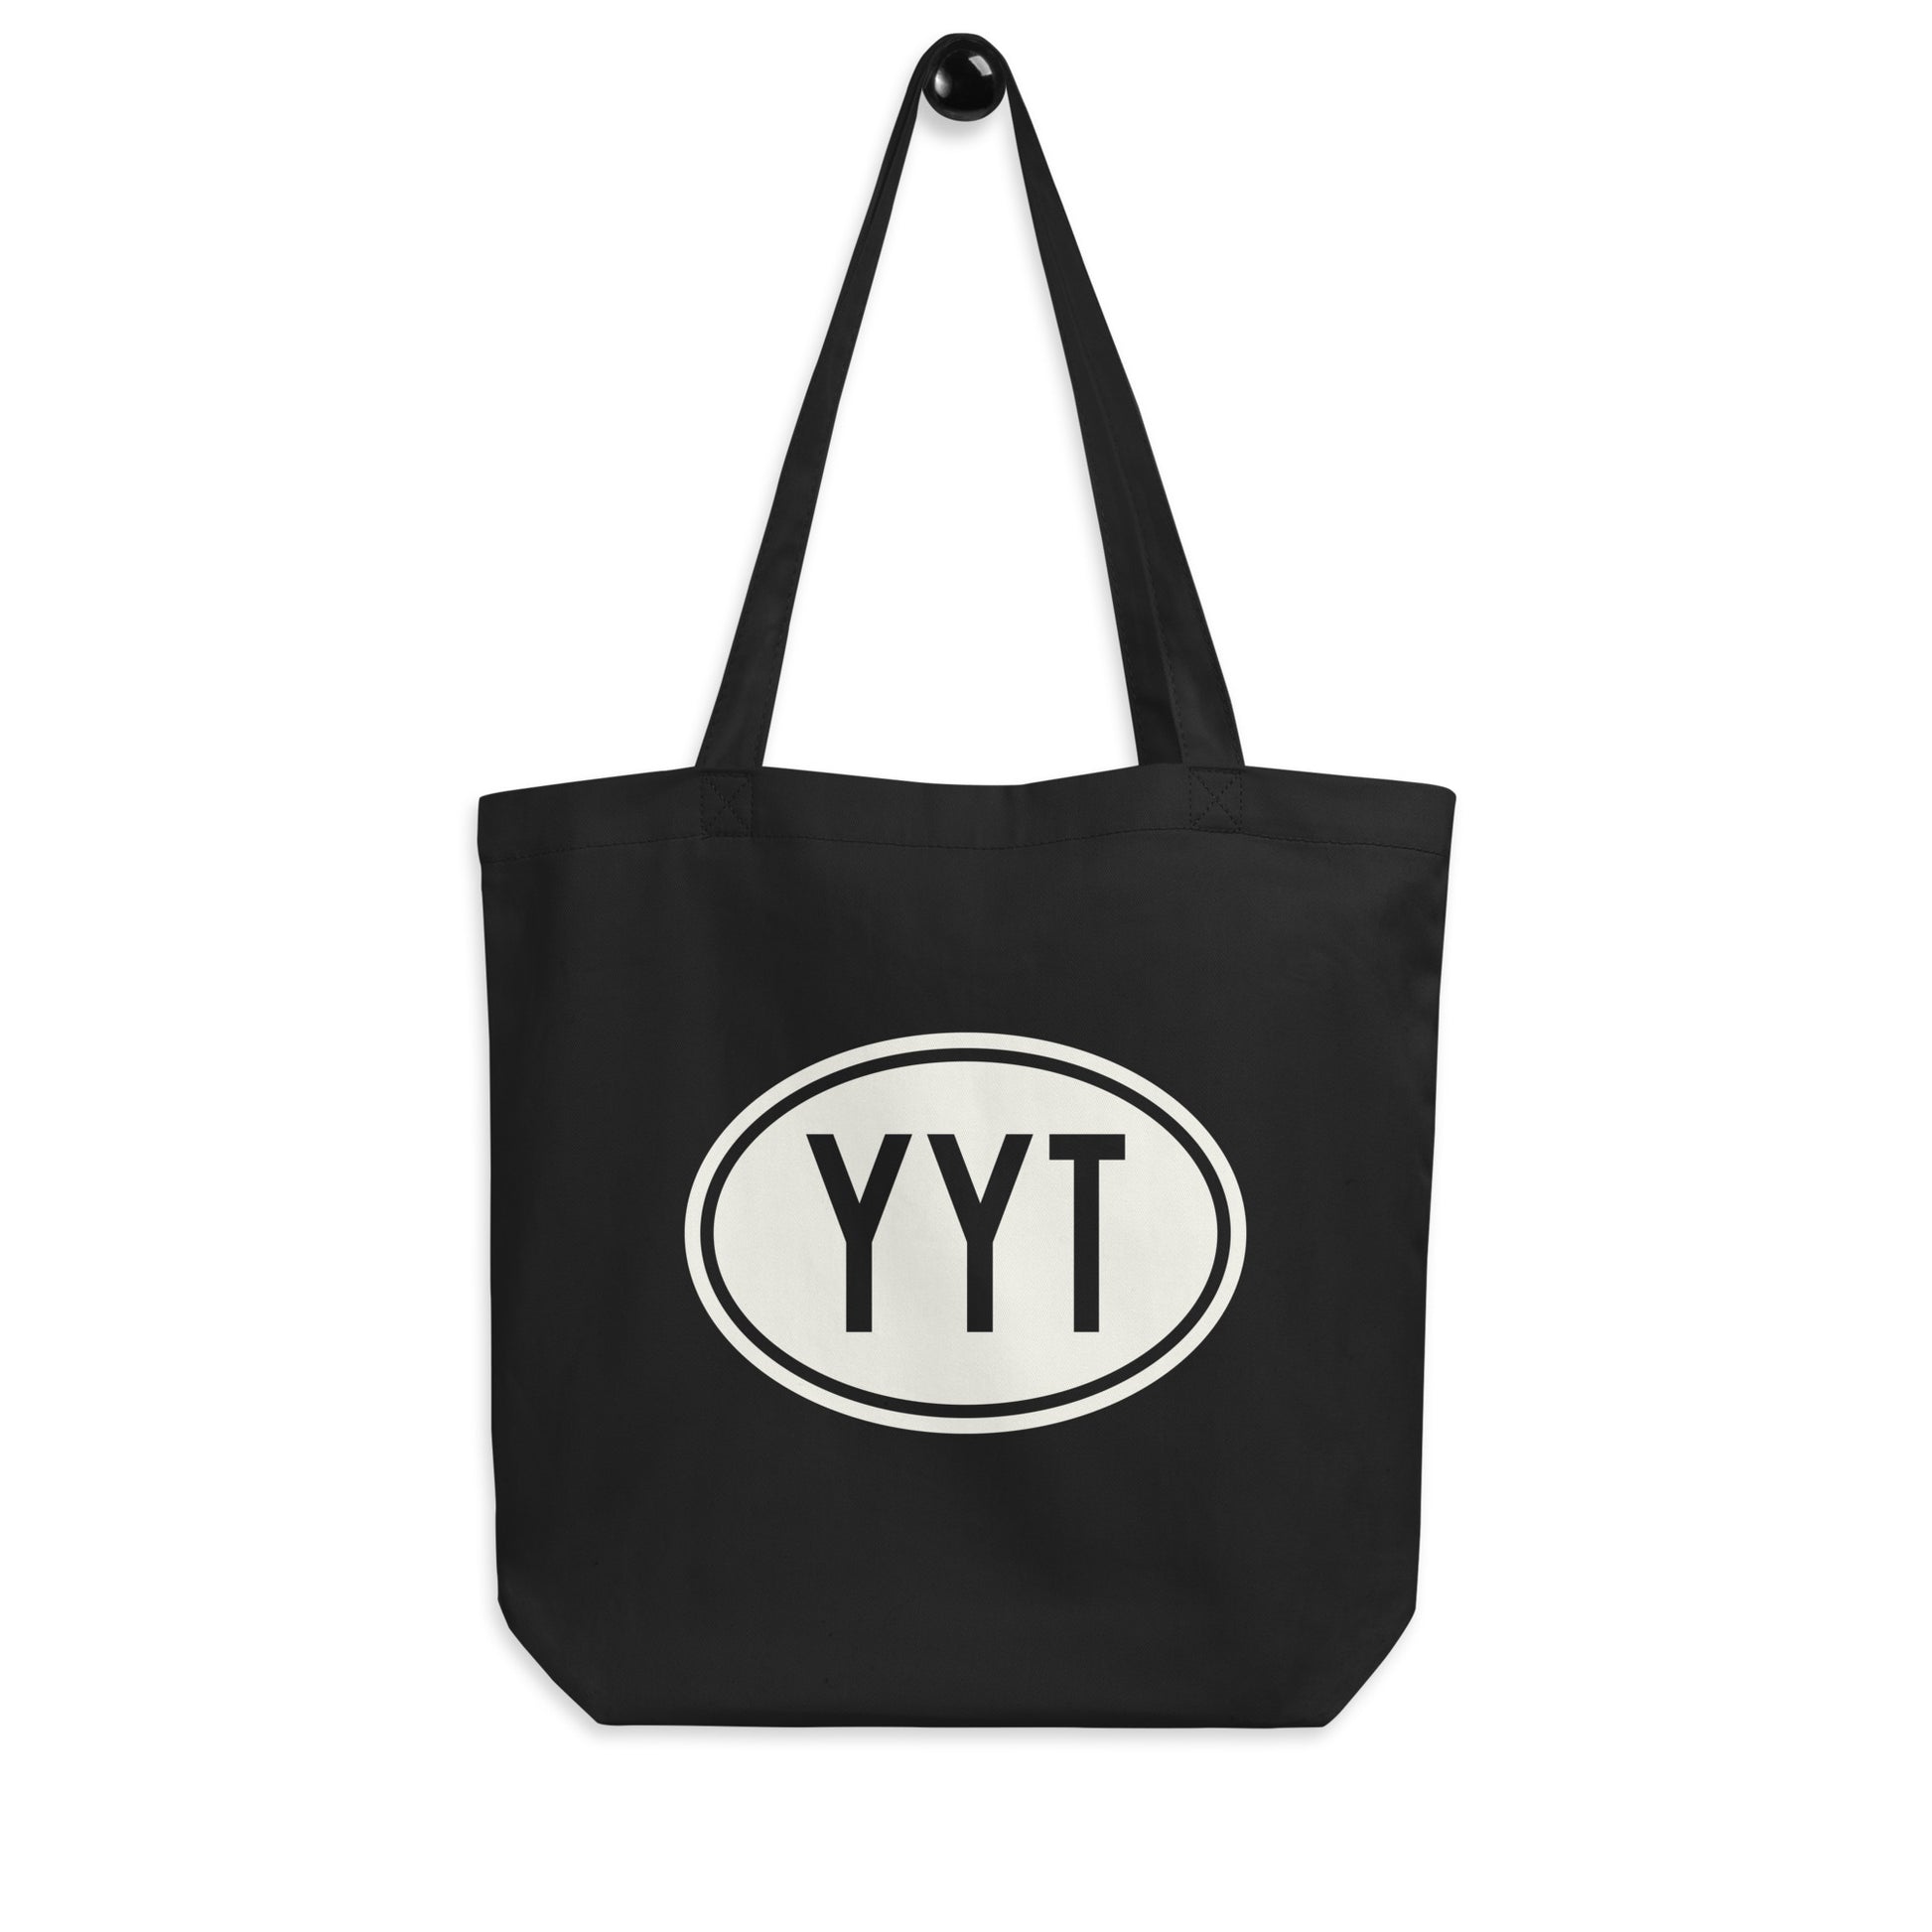 Unique Travel Gift Organic Tote - White Oval • YYT St. John's • YHM Designs - Image 04